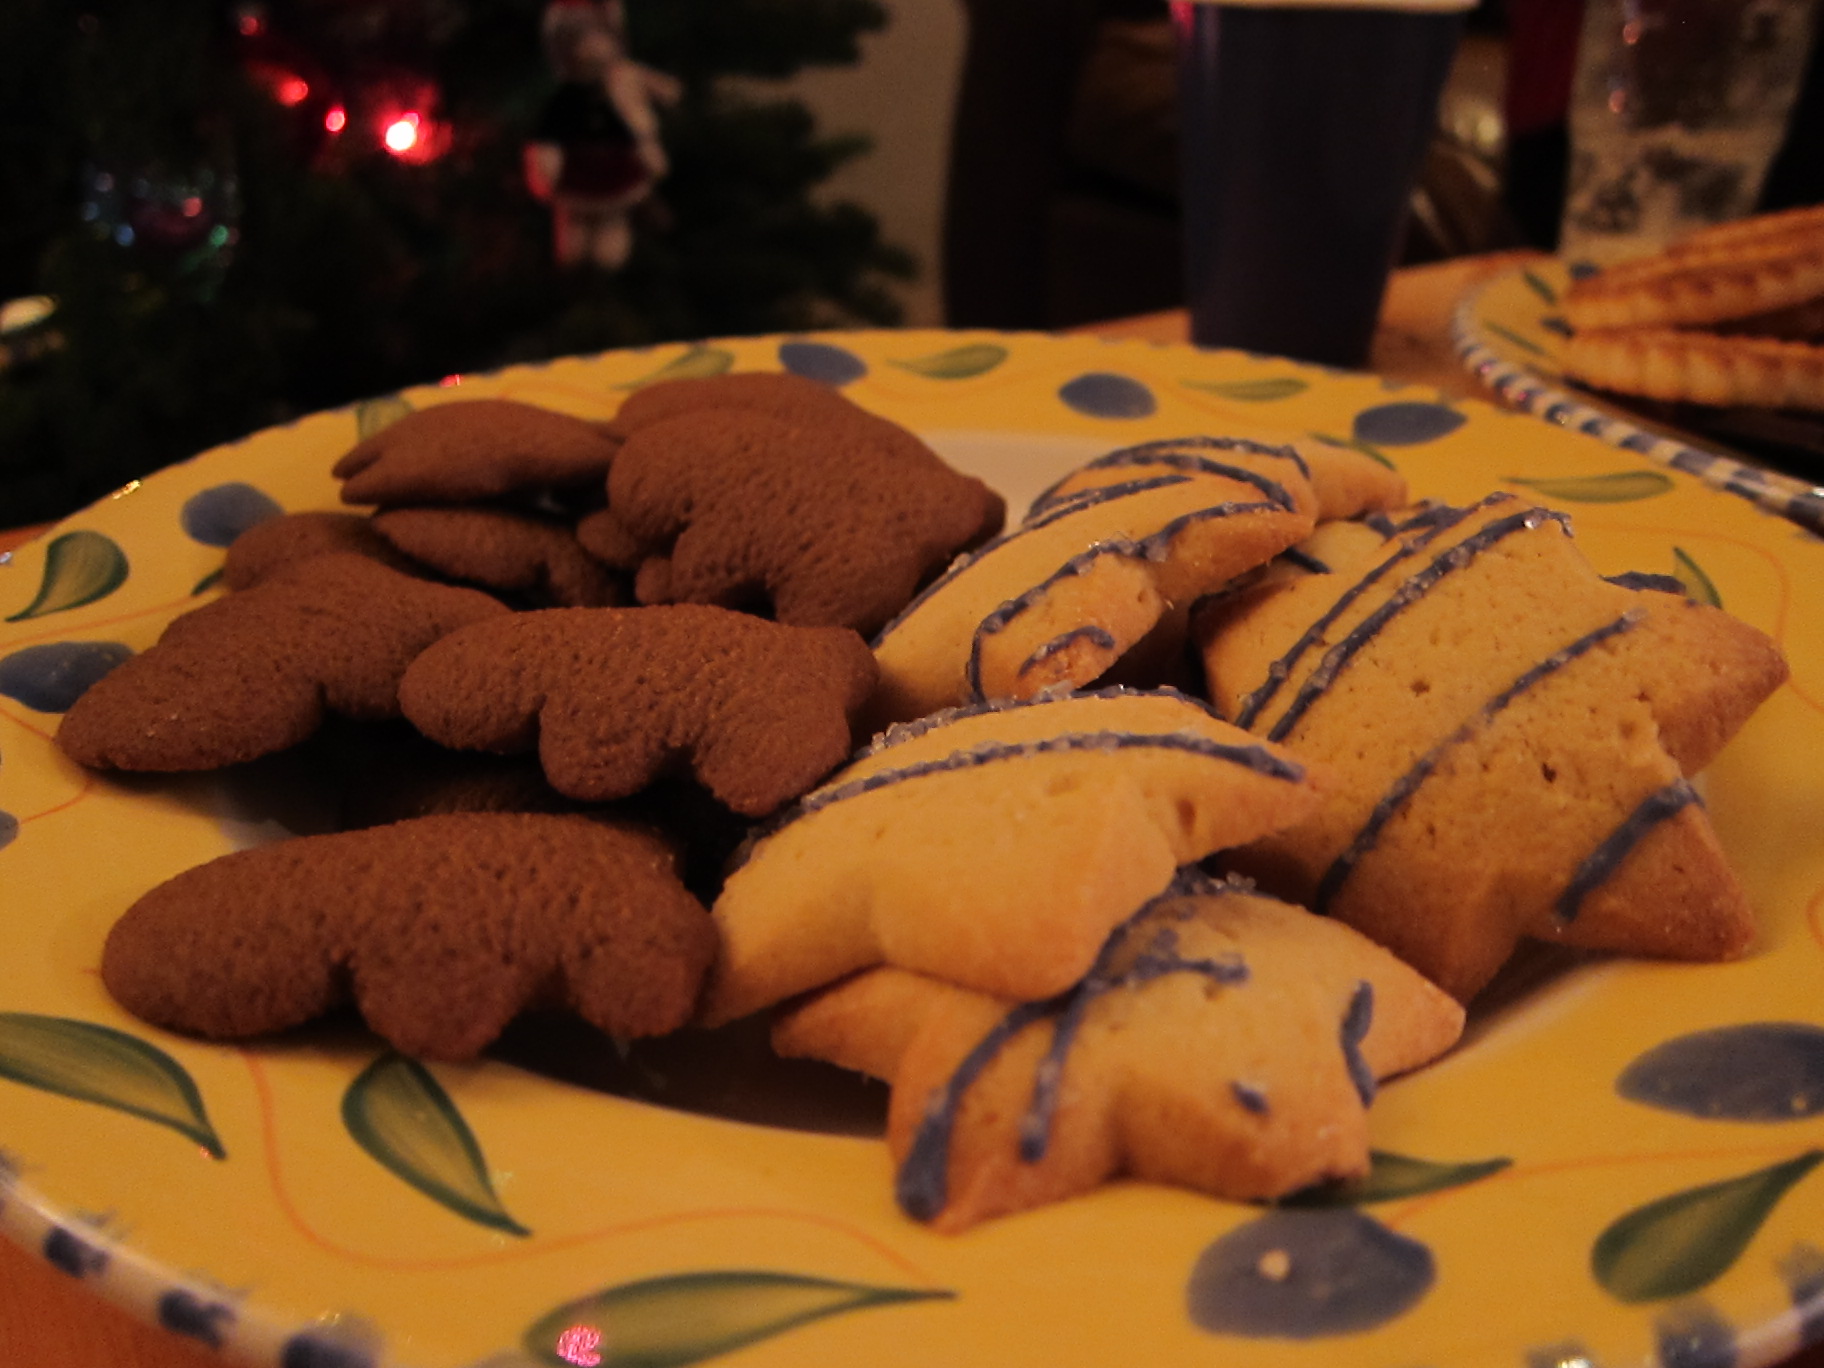 some cookies are sitting on a yellow plate